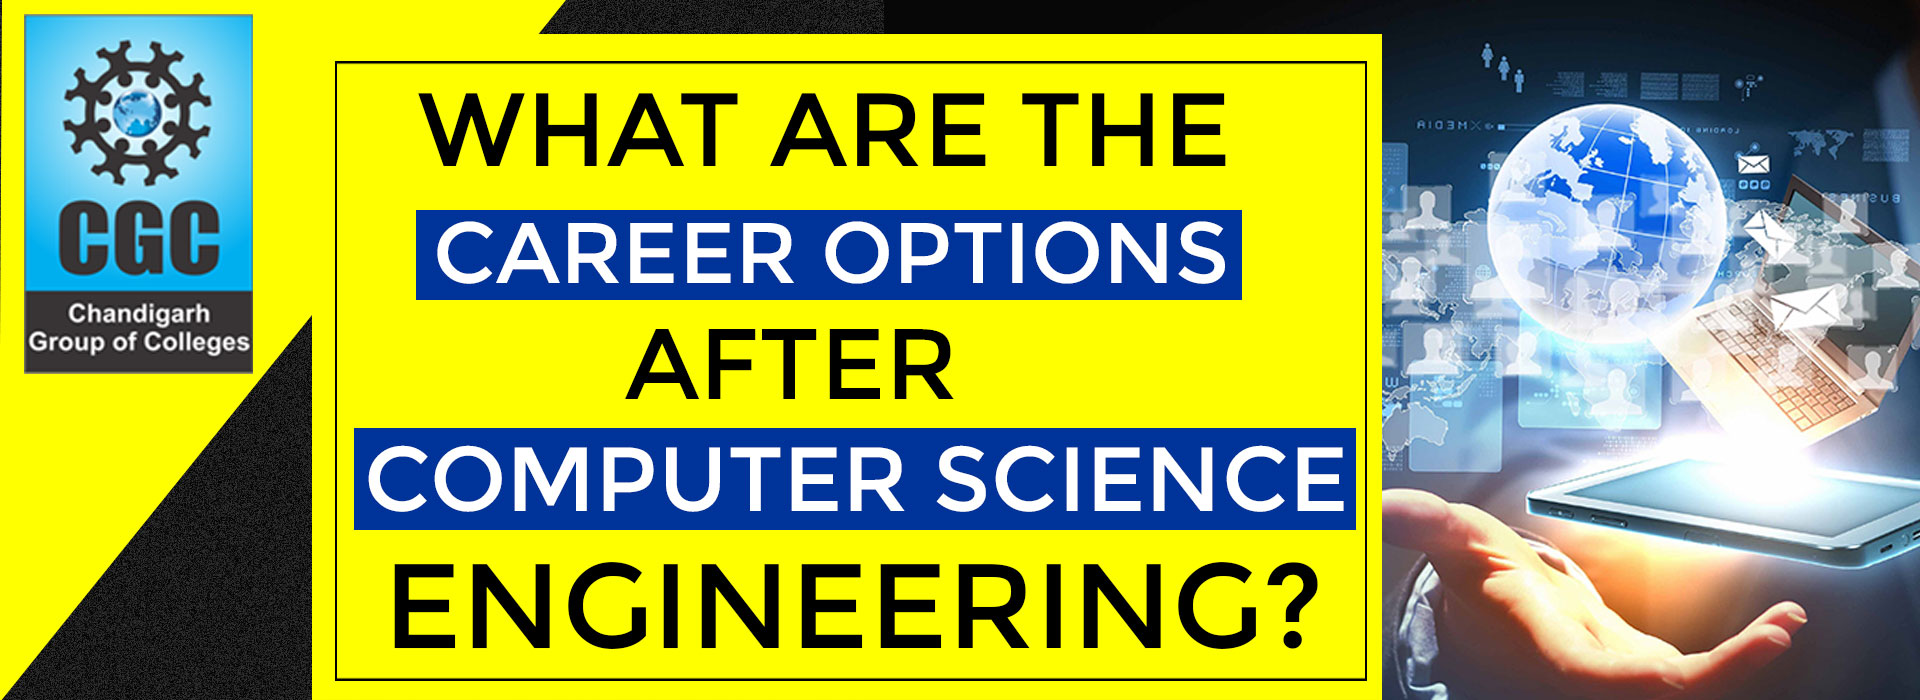 What are the career options after Computer Science Engineering? 